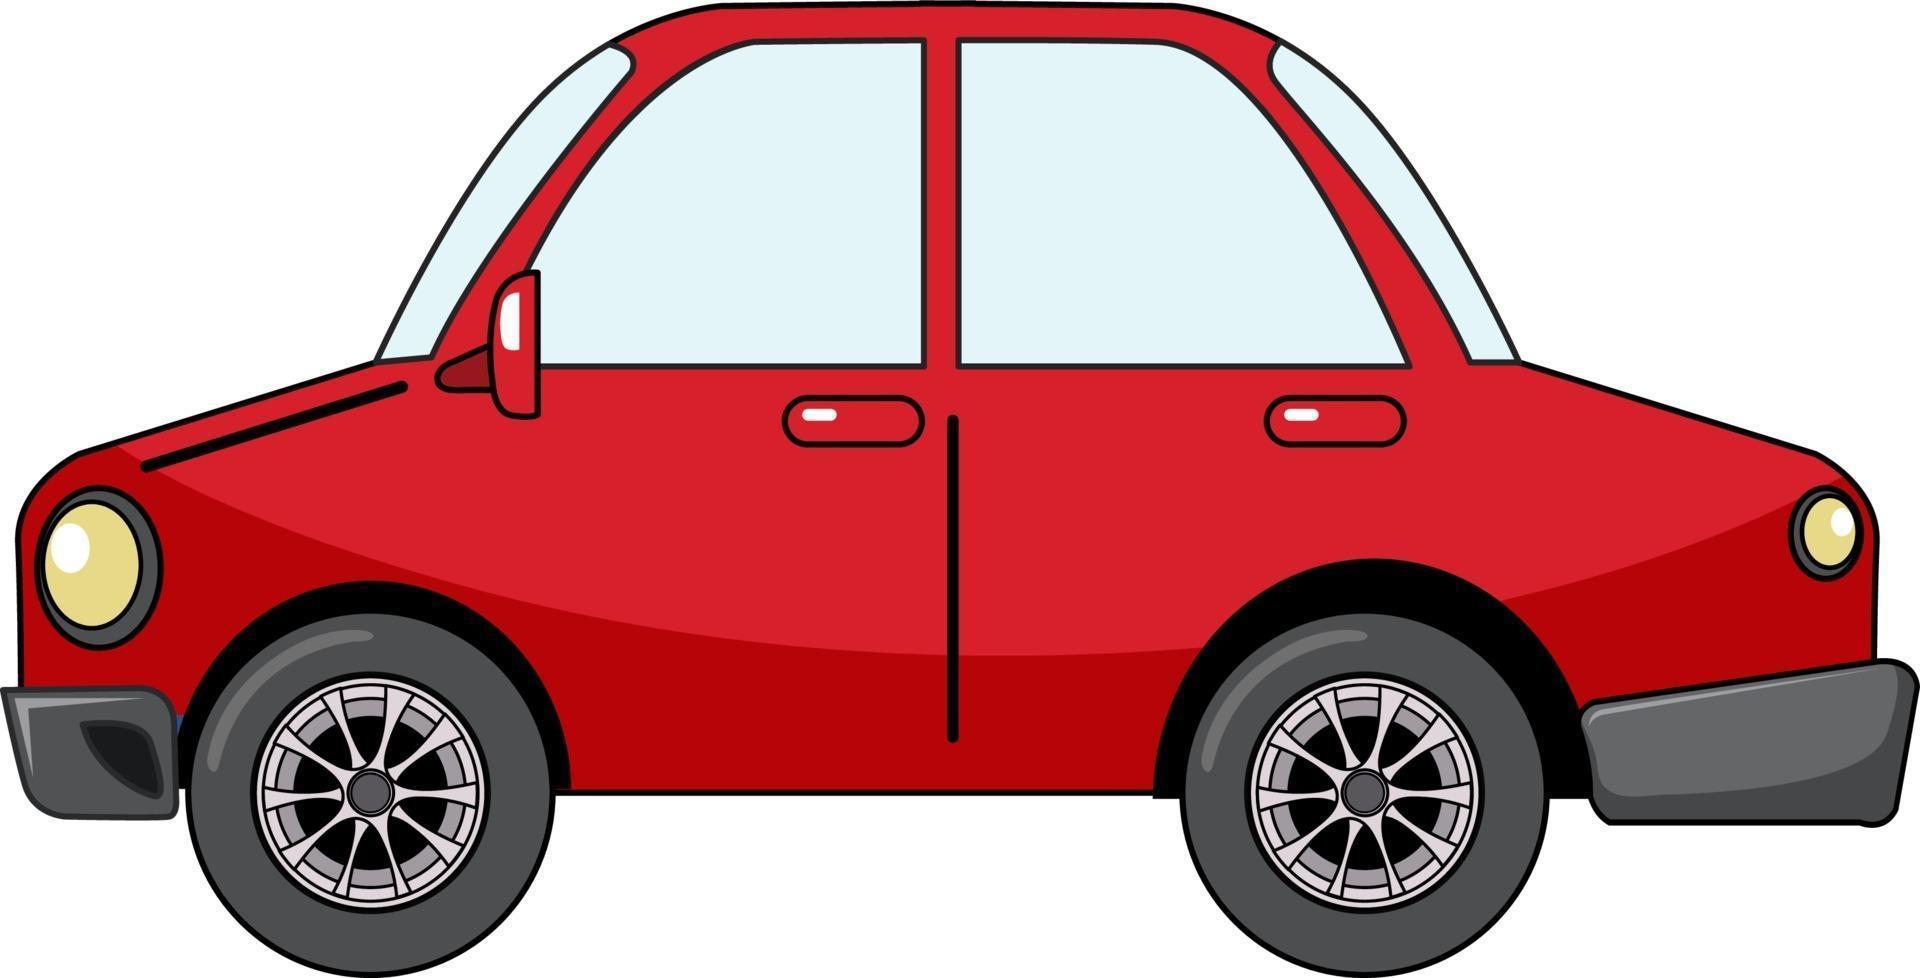 Red sedan car in cartoon style isolated on white background vector